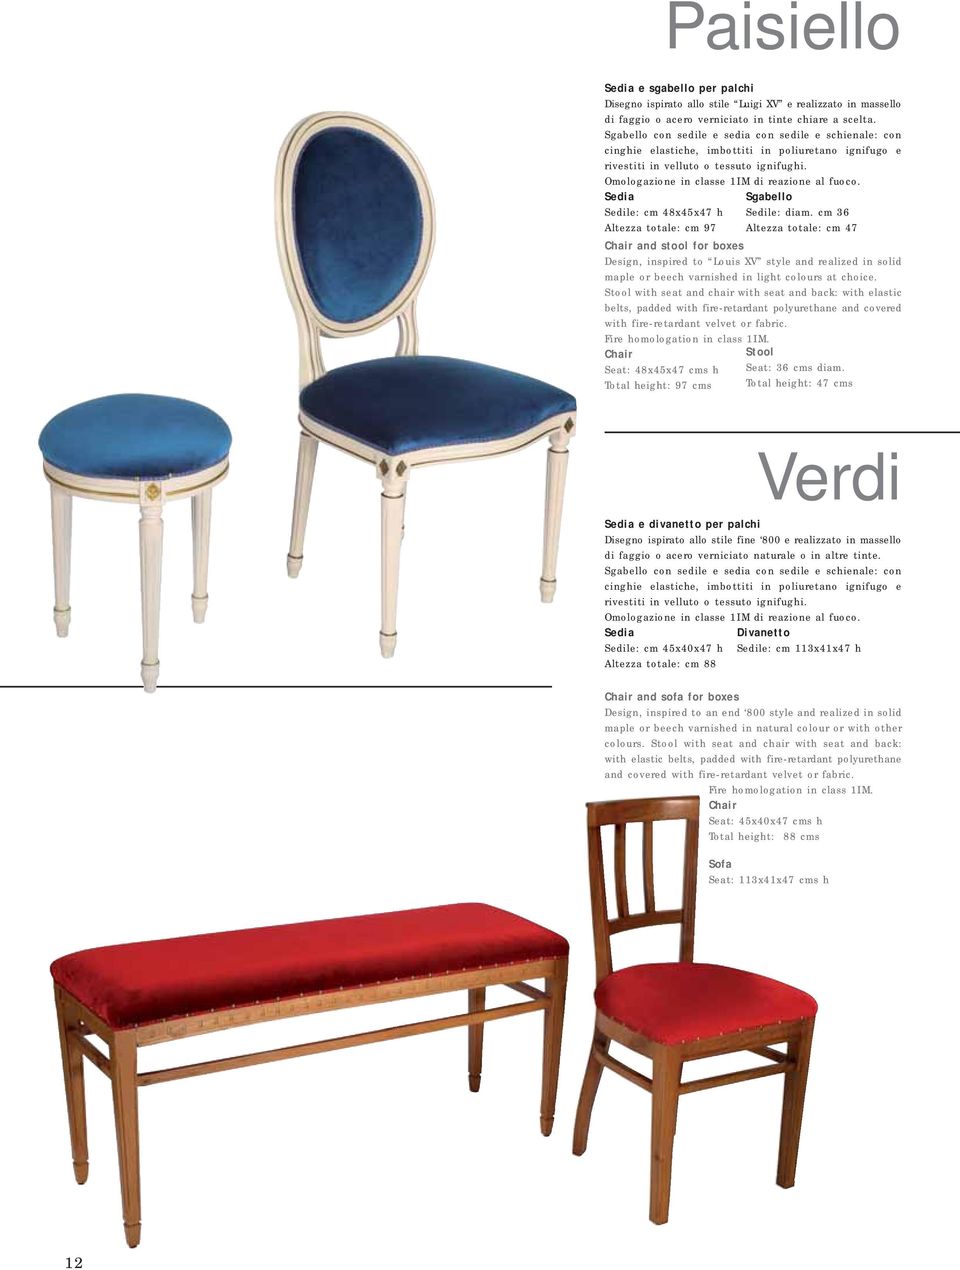 Sedia Sedile: cm 48x45x47 h Altezza totale: cm 97 Chair and stool for boxes Design, inspired to Louis XV style and realized in solid maple or beech varnished in light colours at choice.